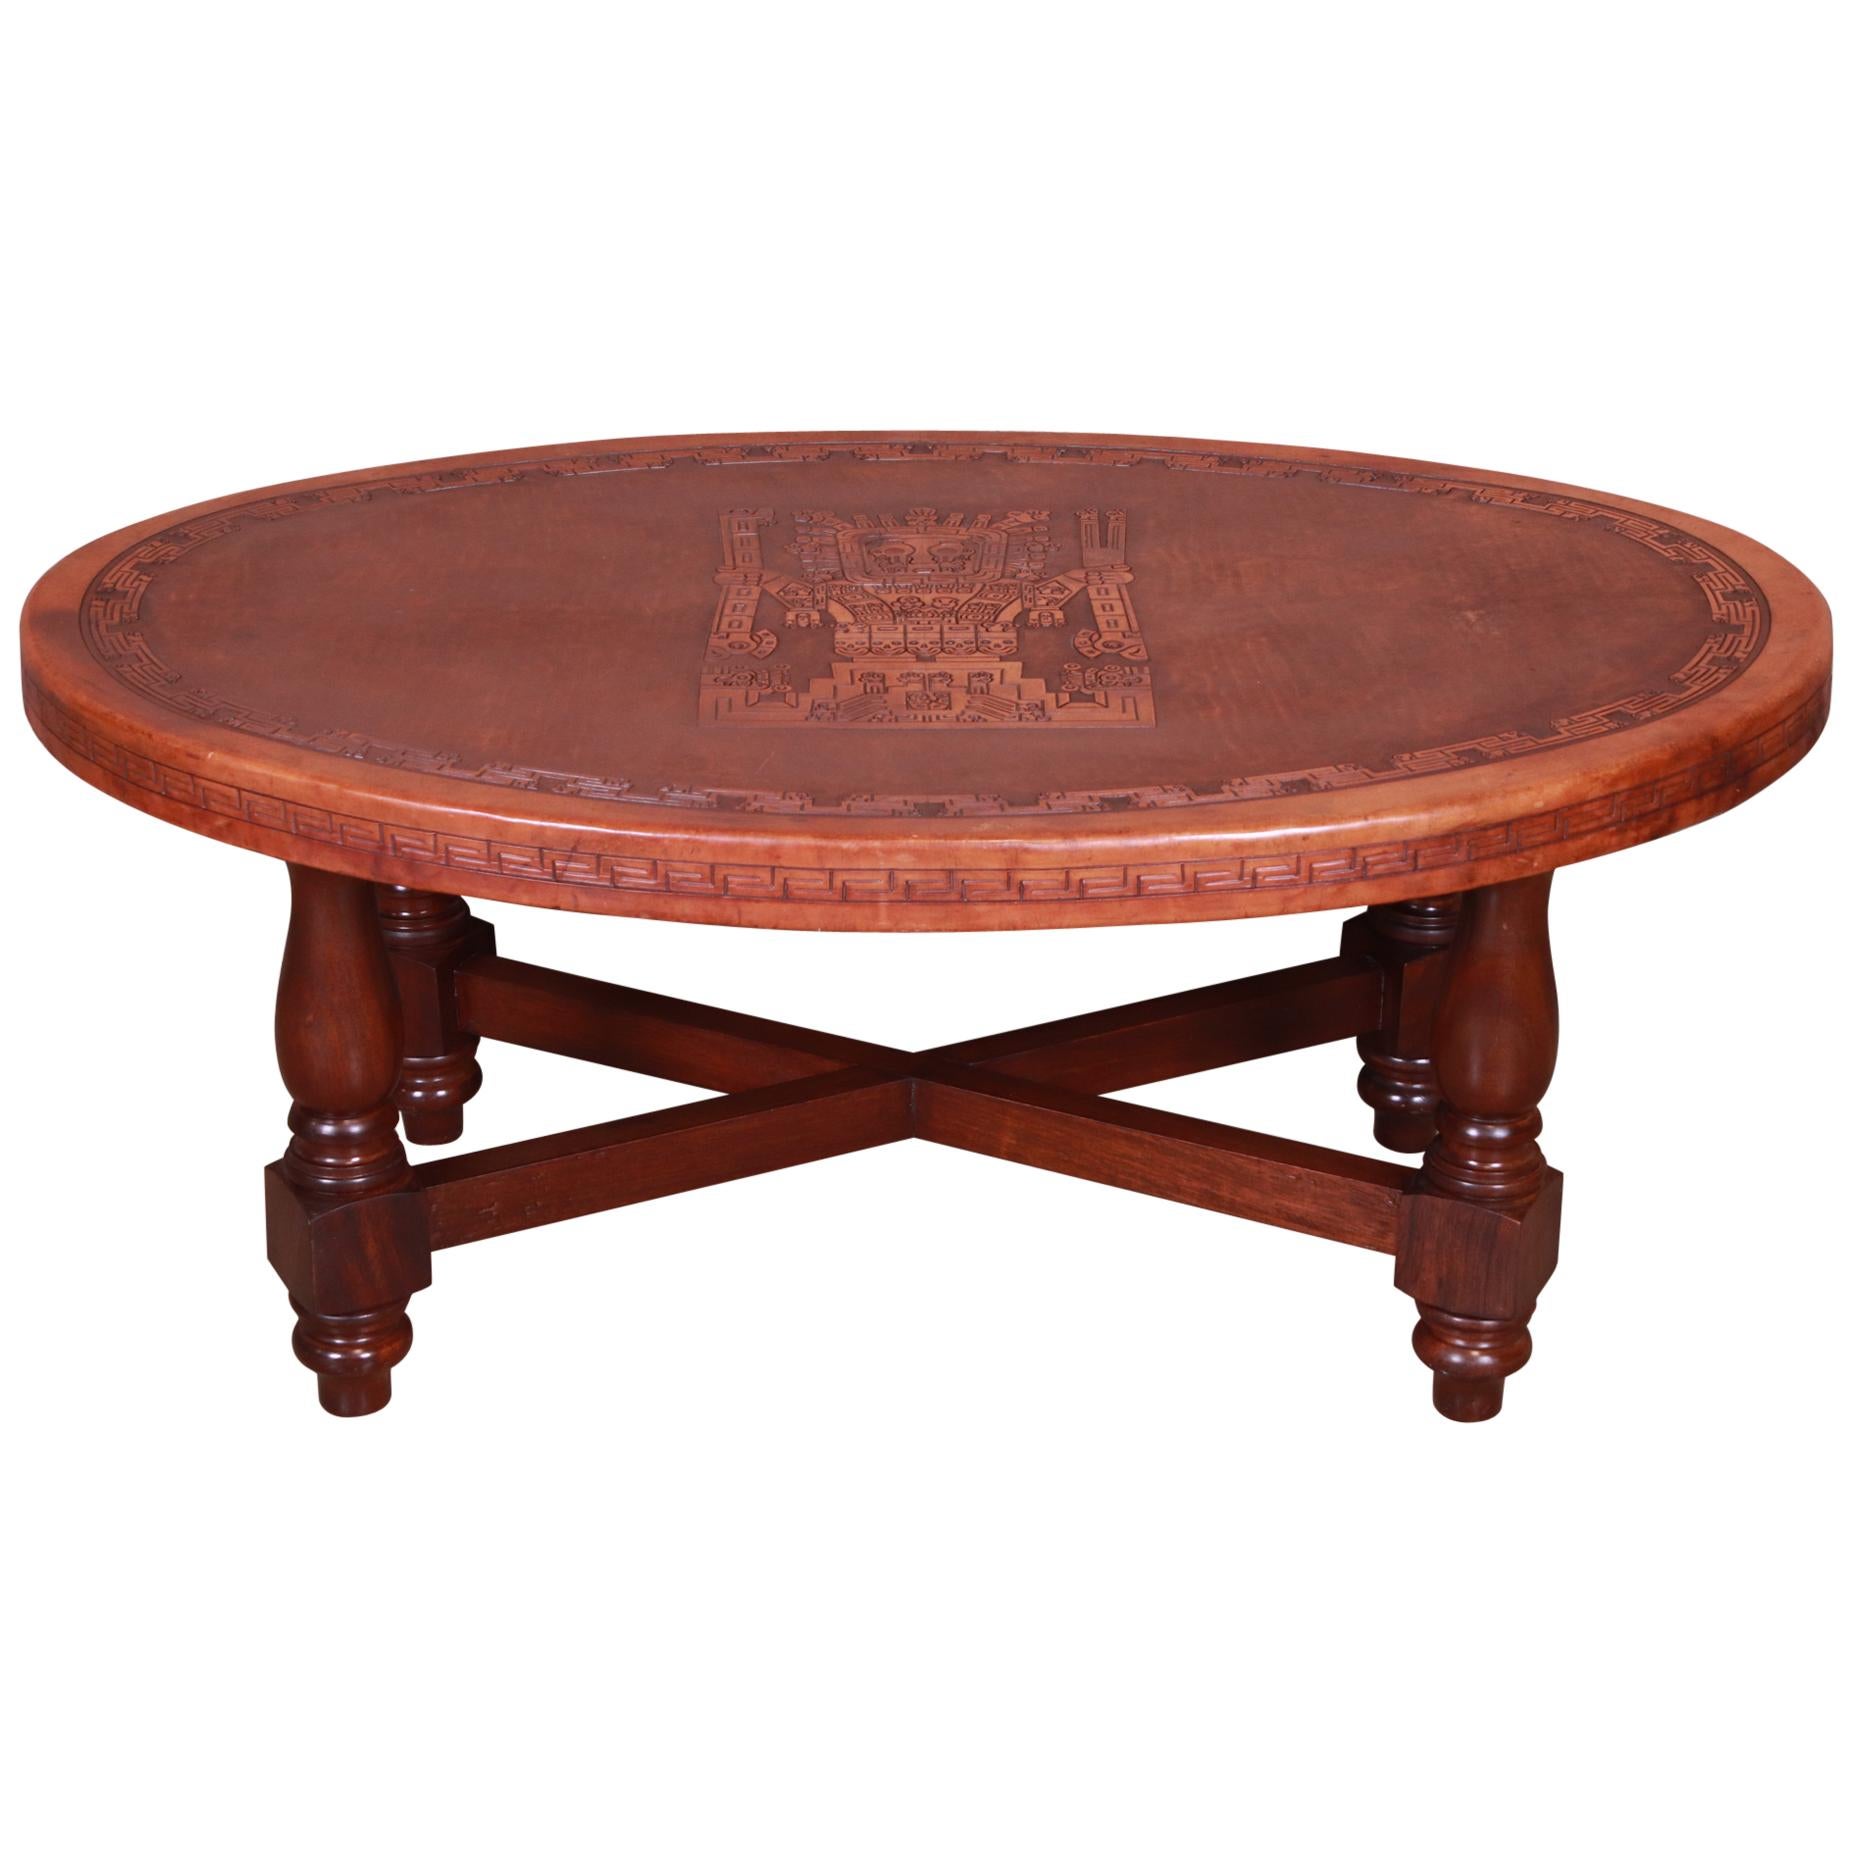 A rare and exceptional midcentury South American modernist coffee table

By Angel Pazmino for Muebles de Estilo

Ecuador, 1960s

Carved solid mahogany legs and stretchers, with tooled leather top with unique embossed Incan